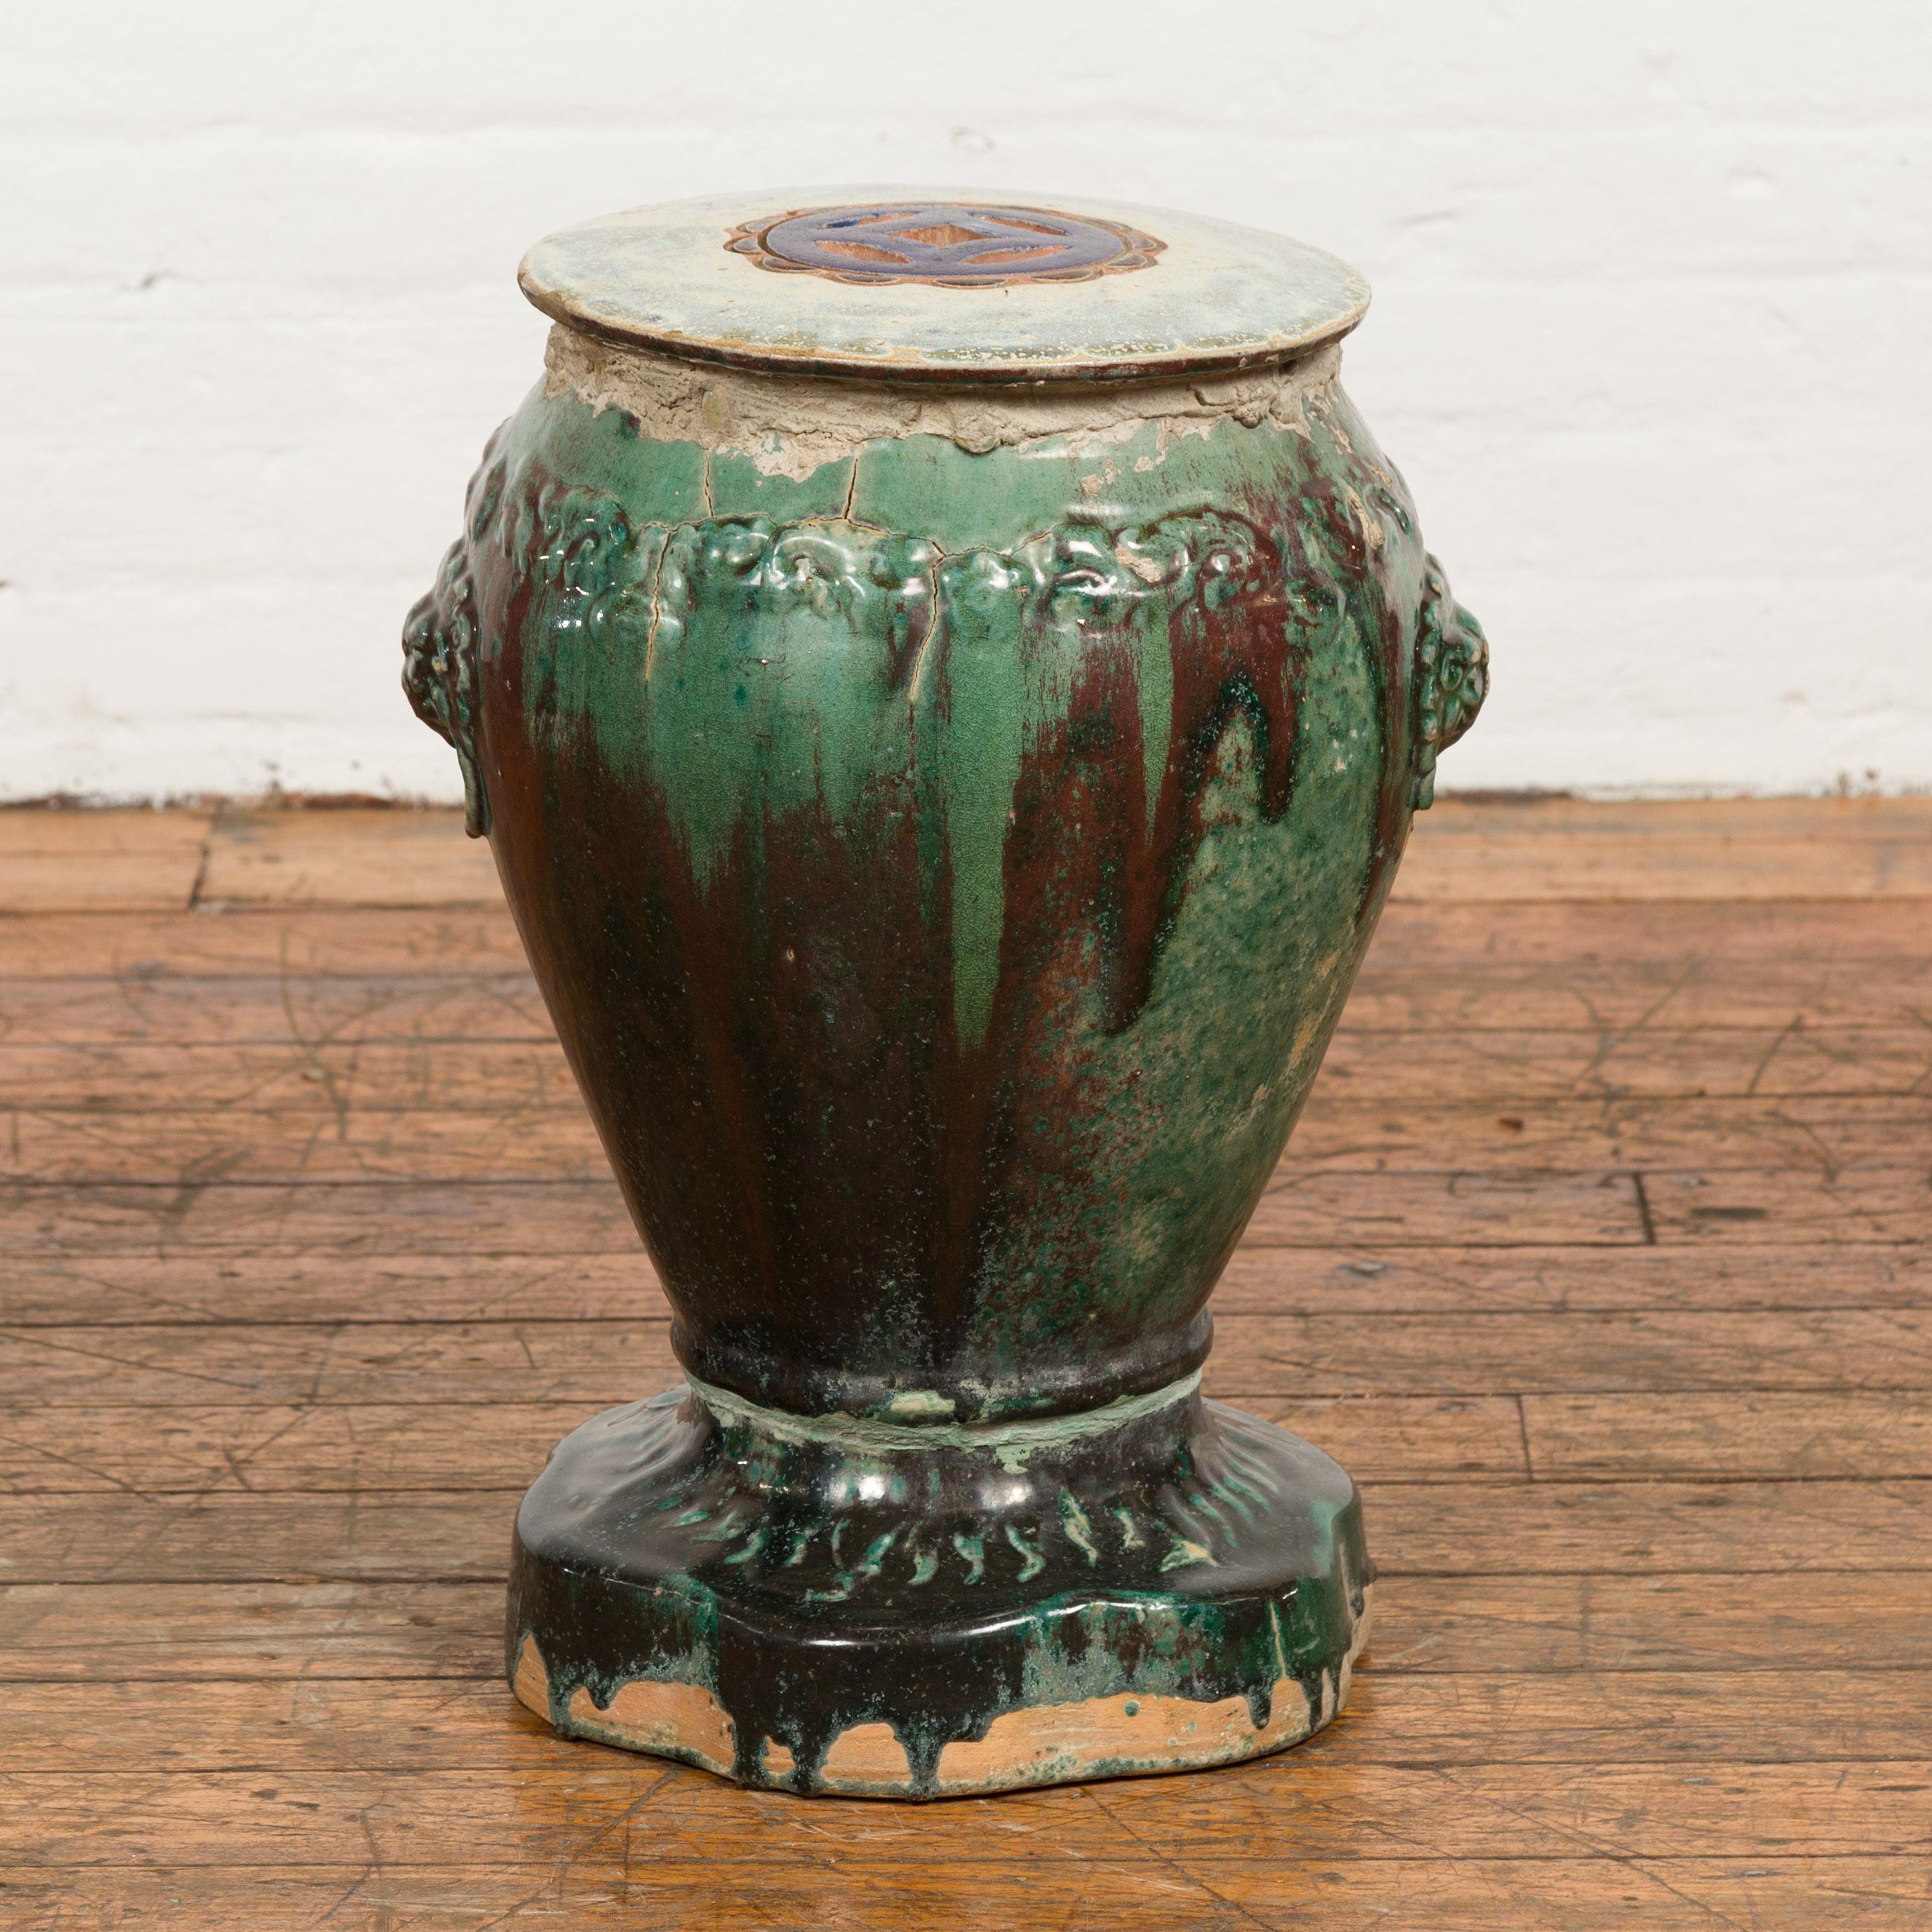 An antique 18th or 19th century Annamese ceramic garden seat from Vietnam with green and brown glaze, raised scrolling frieze, pierced top, guardian lion handles and shaped base. Made of ceramic and boasting a green glaze accented beautifully with